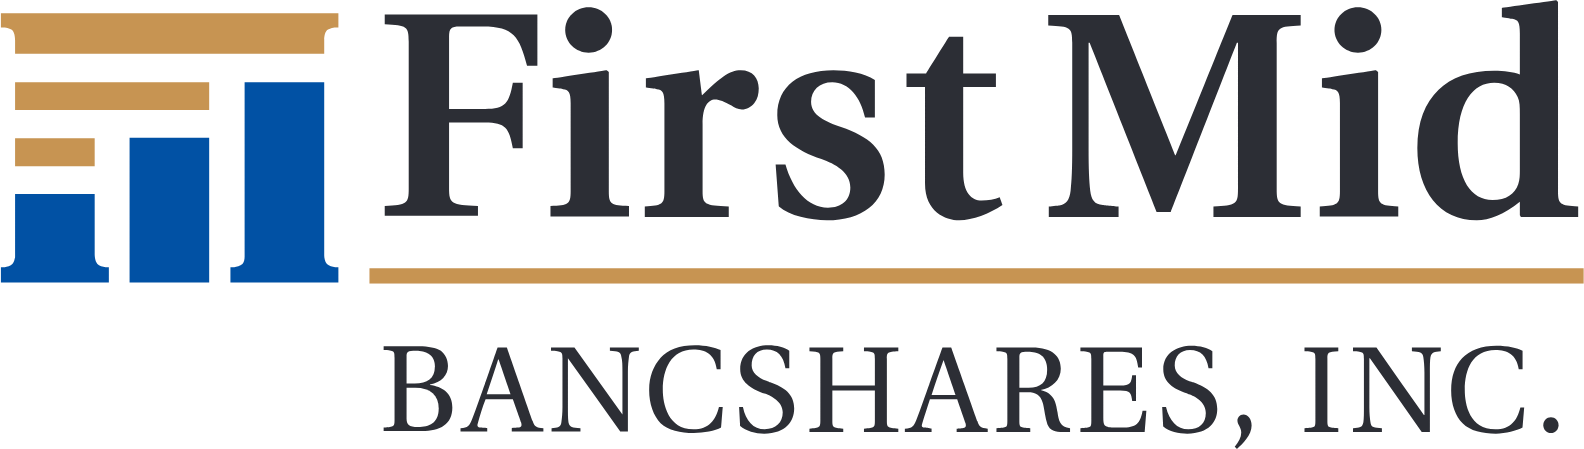 First Mid-Illinois Bancshares logo large (transparent PNG)